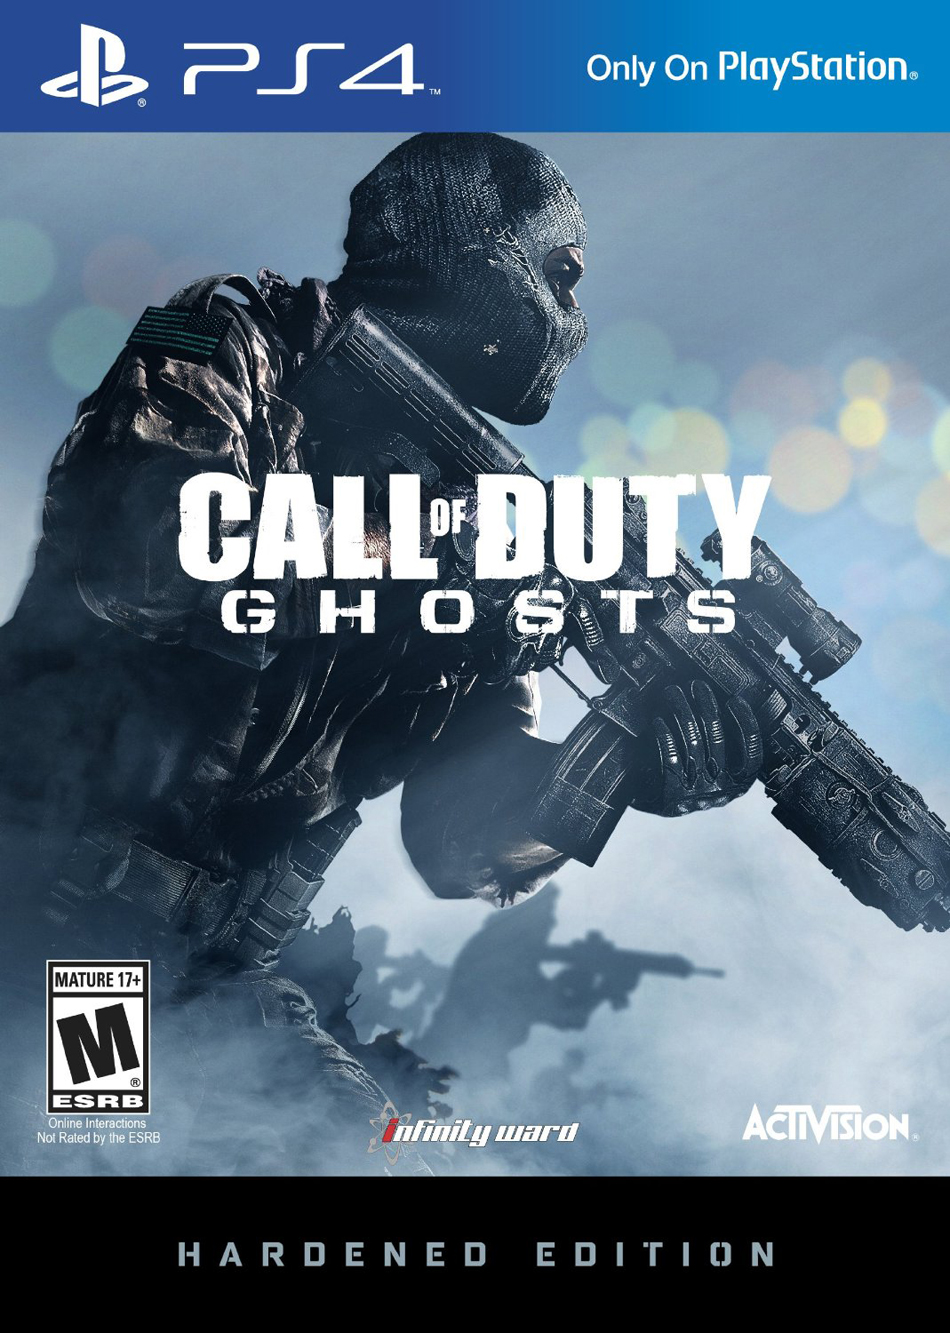 Call of Duty: Ghosts Hardened Edition for PS4 detailed